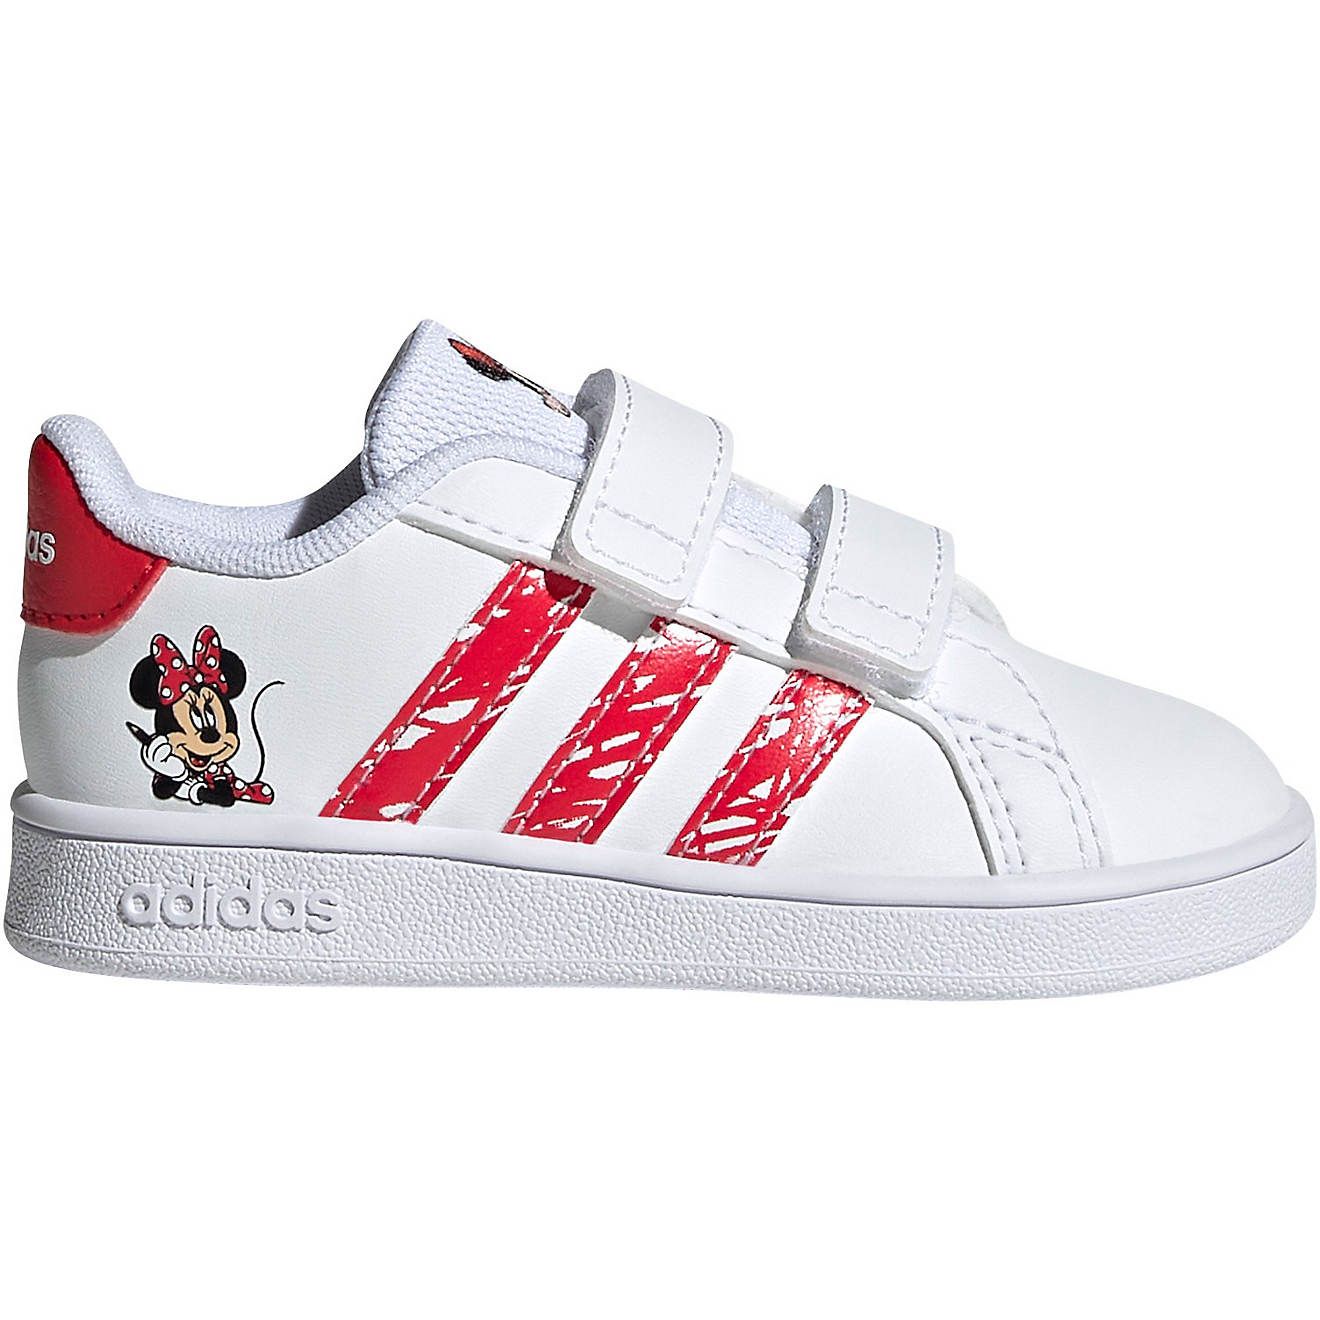 adidas Toddler Girls’ Disney Minnie Mouse Grand Court Shoes | Academy Sports + Outdoors